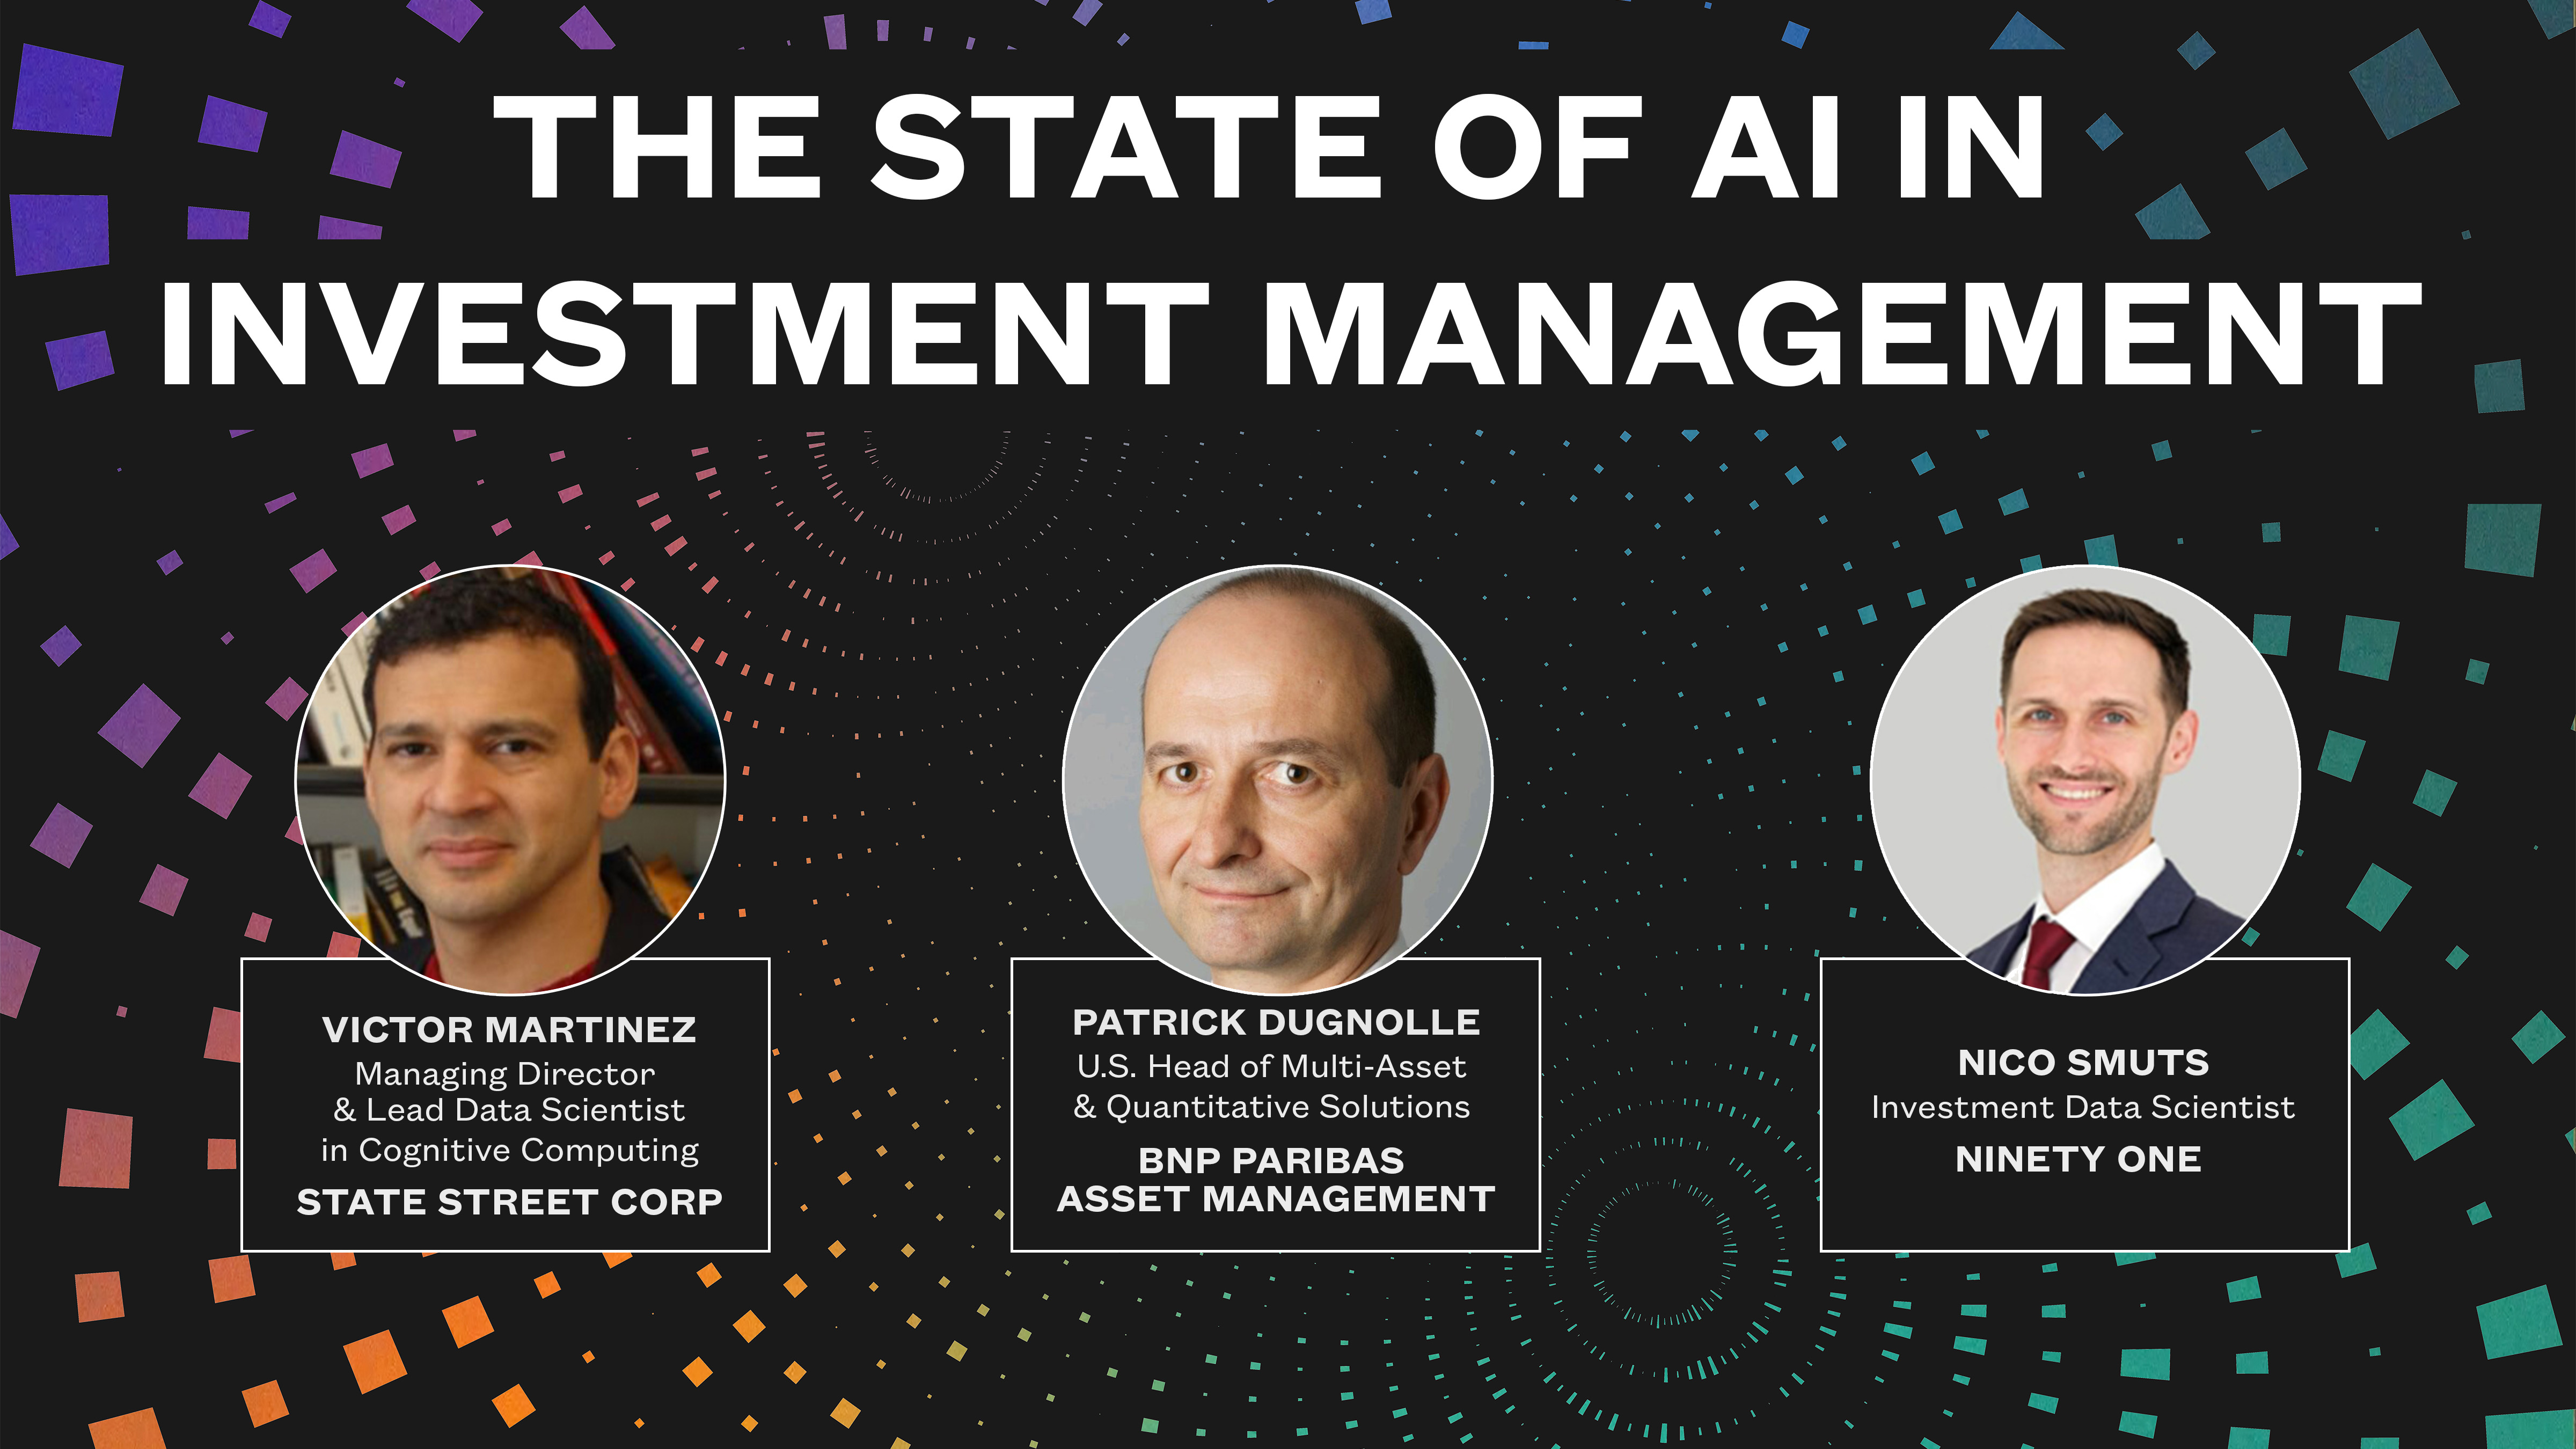 https://ai4.io/blog/2020/04/22/how-covid-19-is-impacting-the-state-of-ai-in-investment-management/